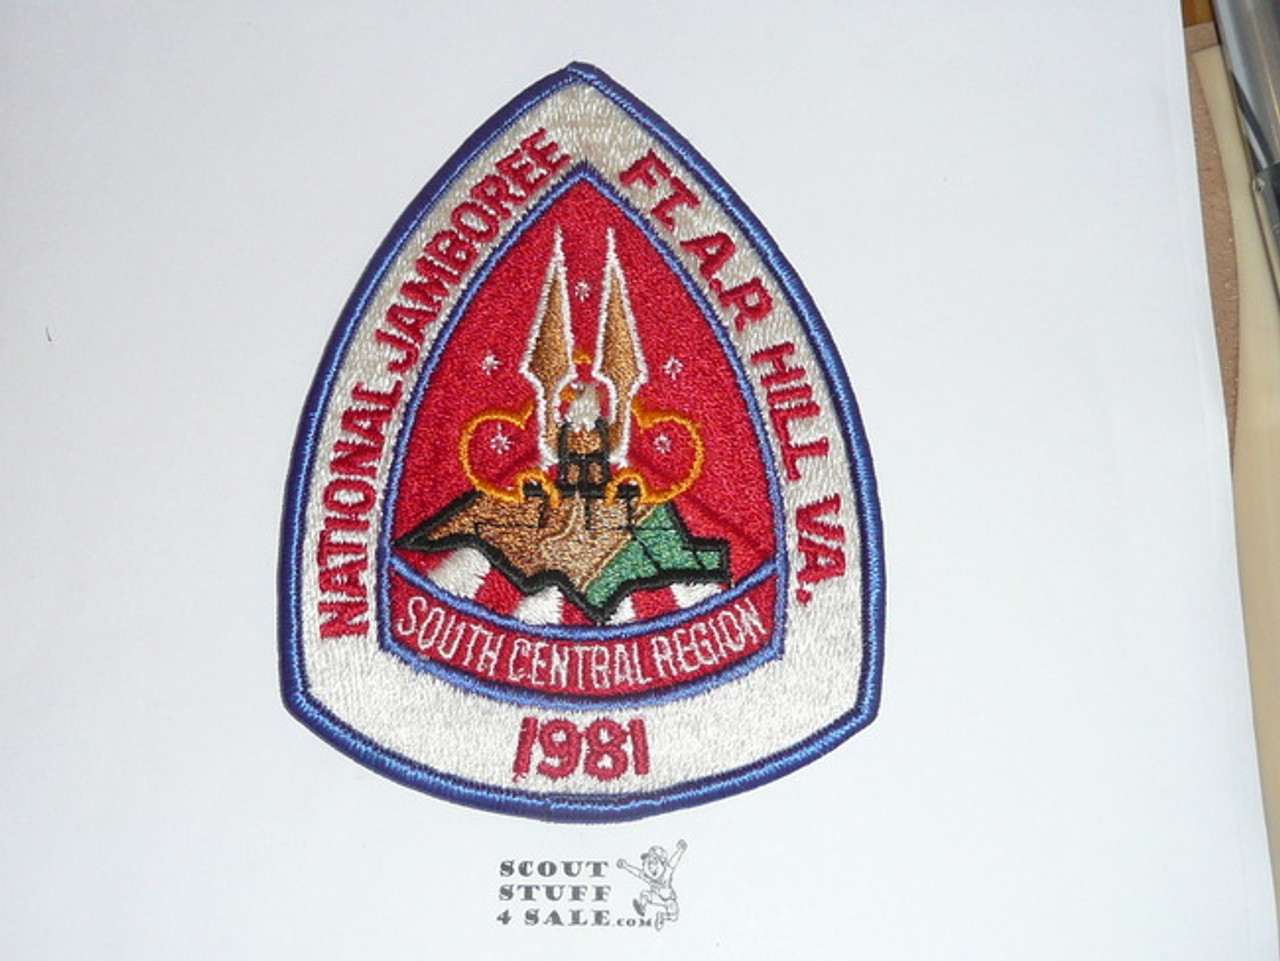 1981 National Jamboree South Central Region Patch